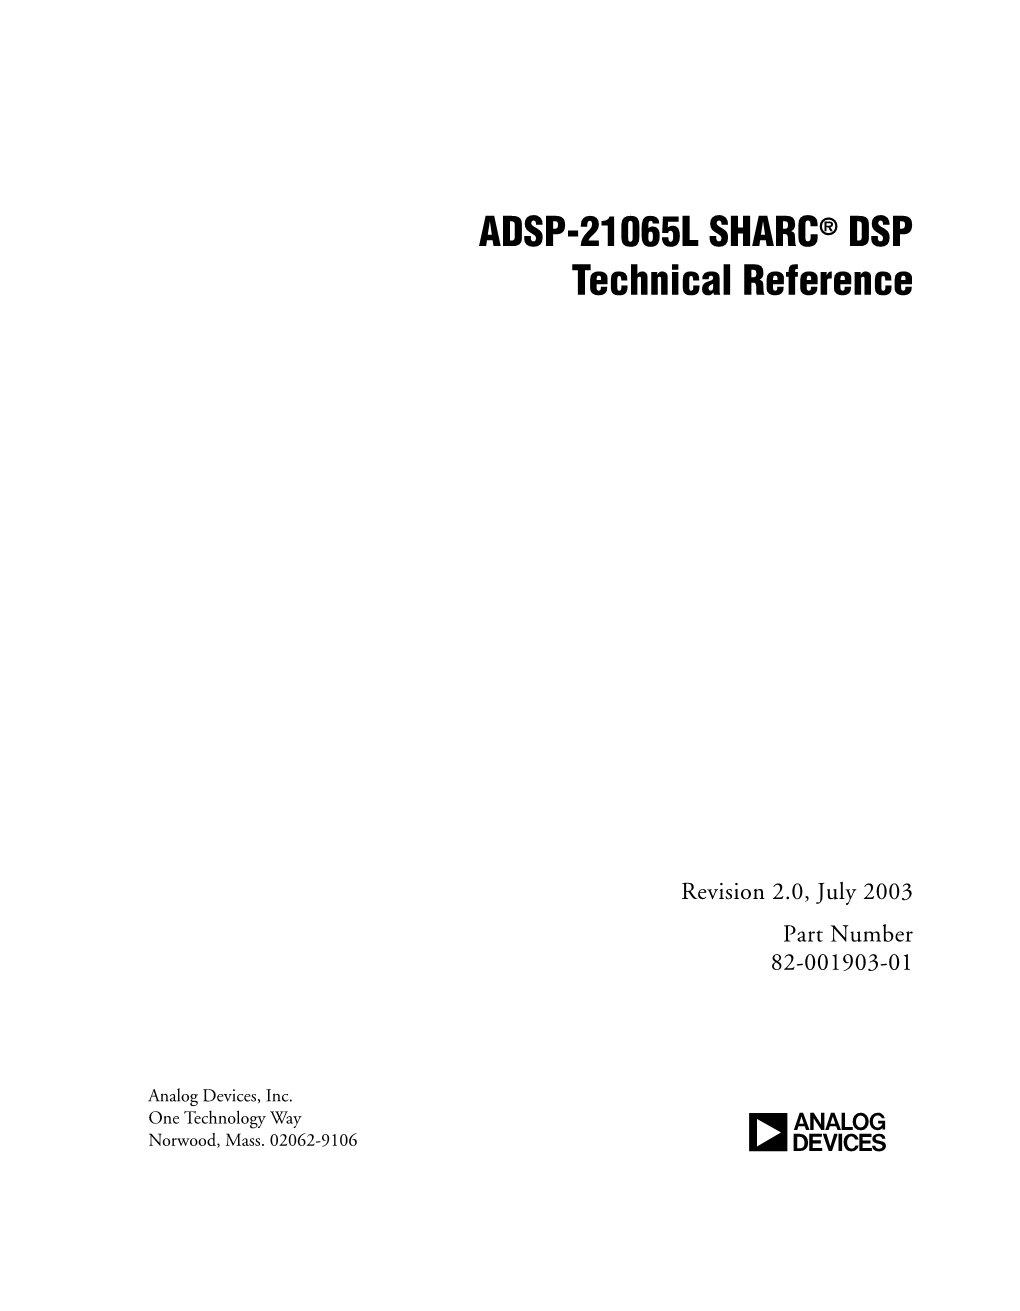 ADSP-21065L SHARC DSP Technical Reference, Revision